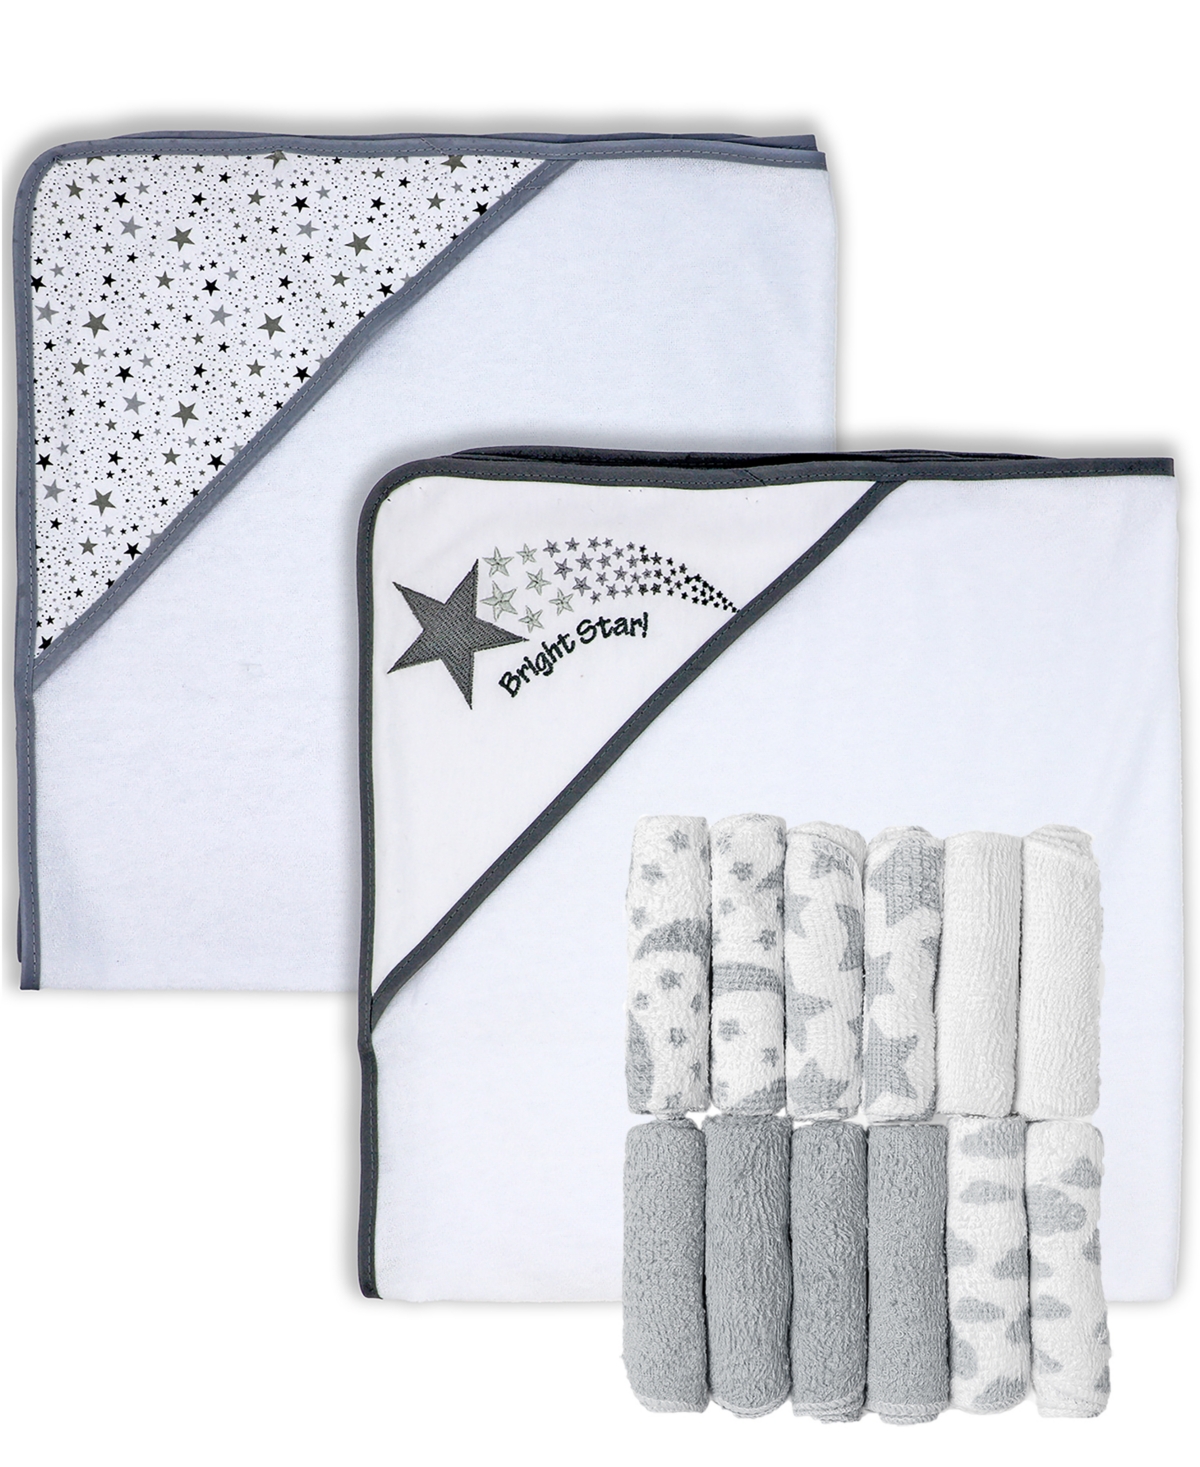 Baby Mode Baby Boys Hooded Towel And Washcloth, 14 Piece Set In White With Gray Stars